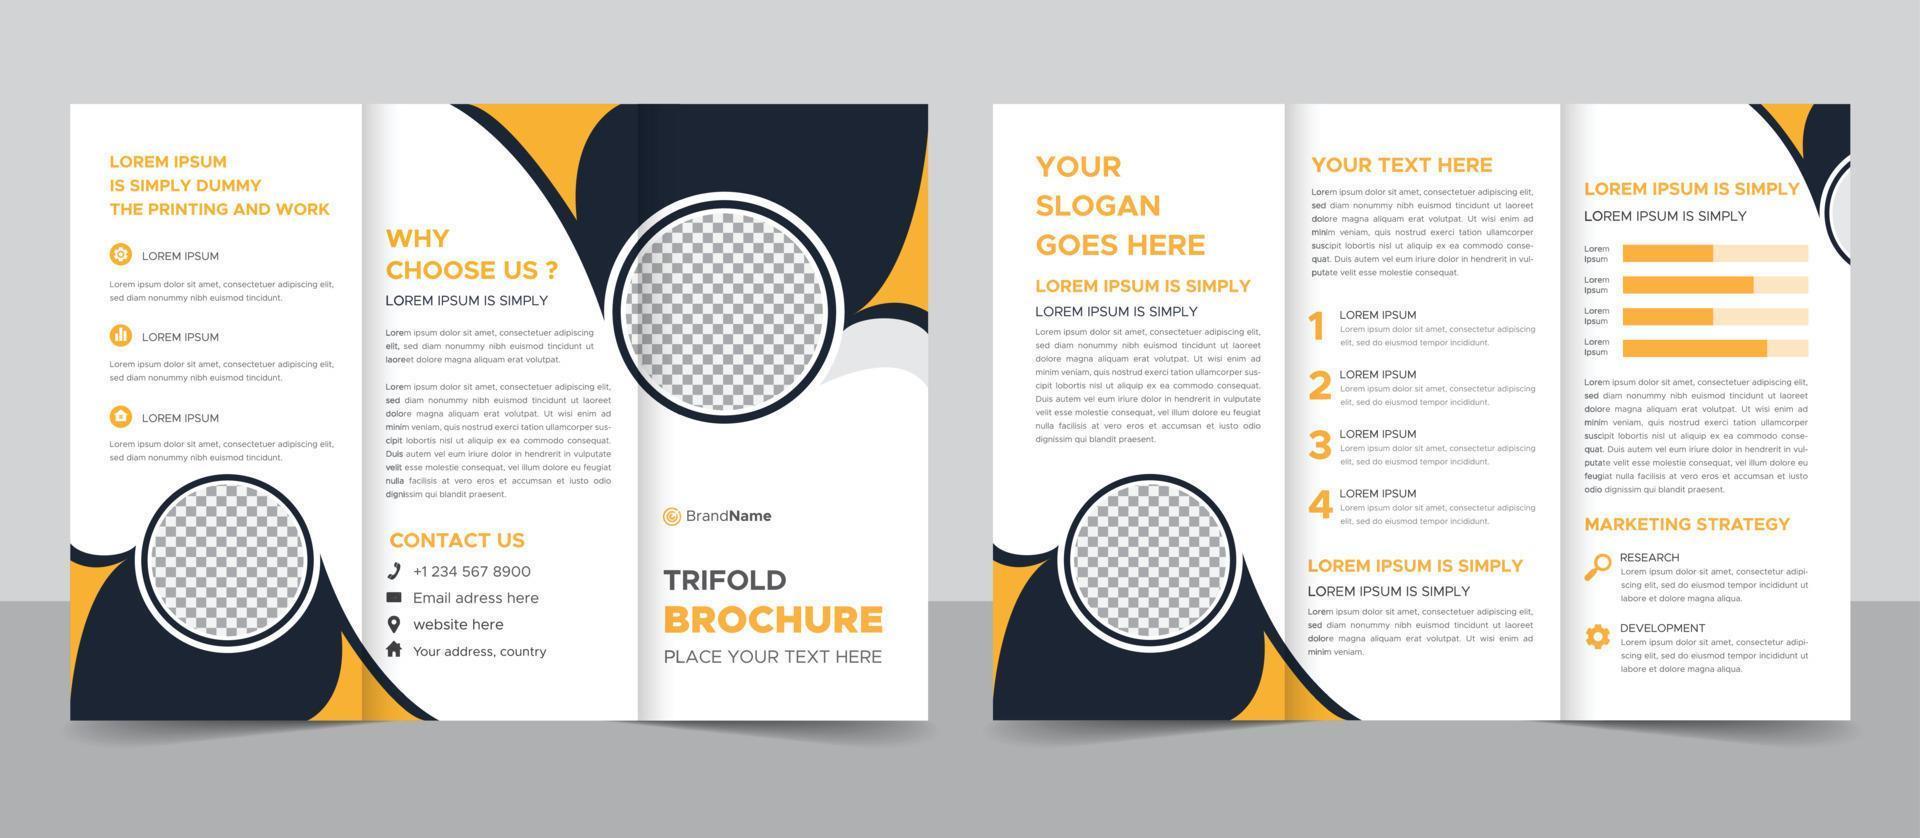 Corporate Modern And Professional Trifold Brochure Template Design. vector